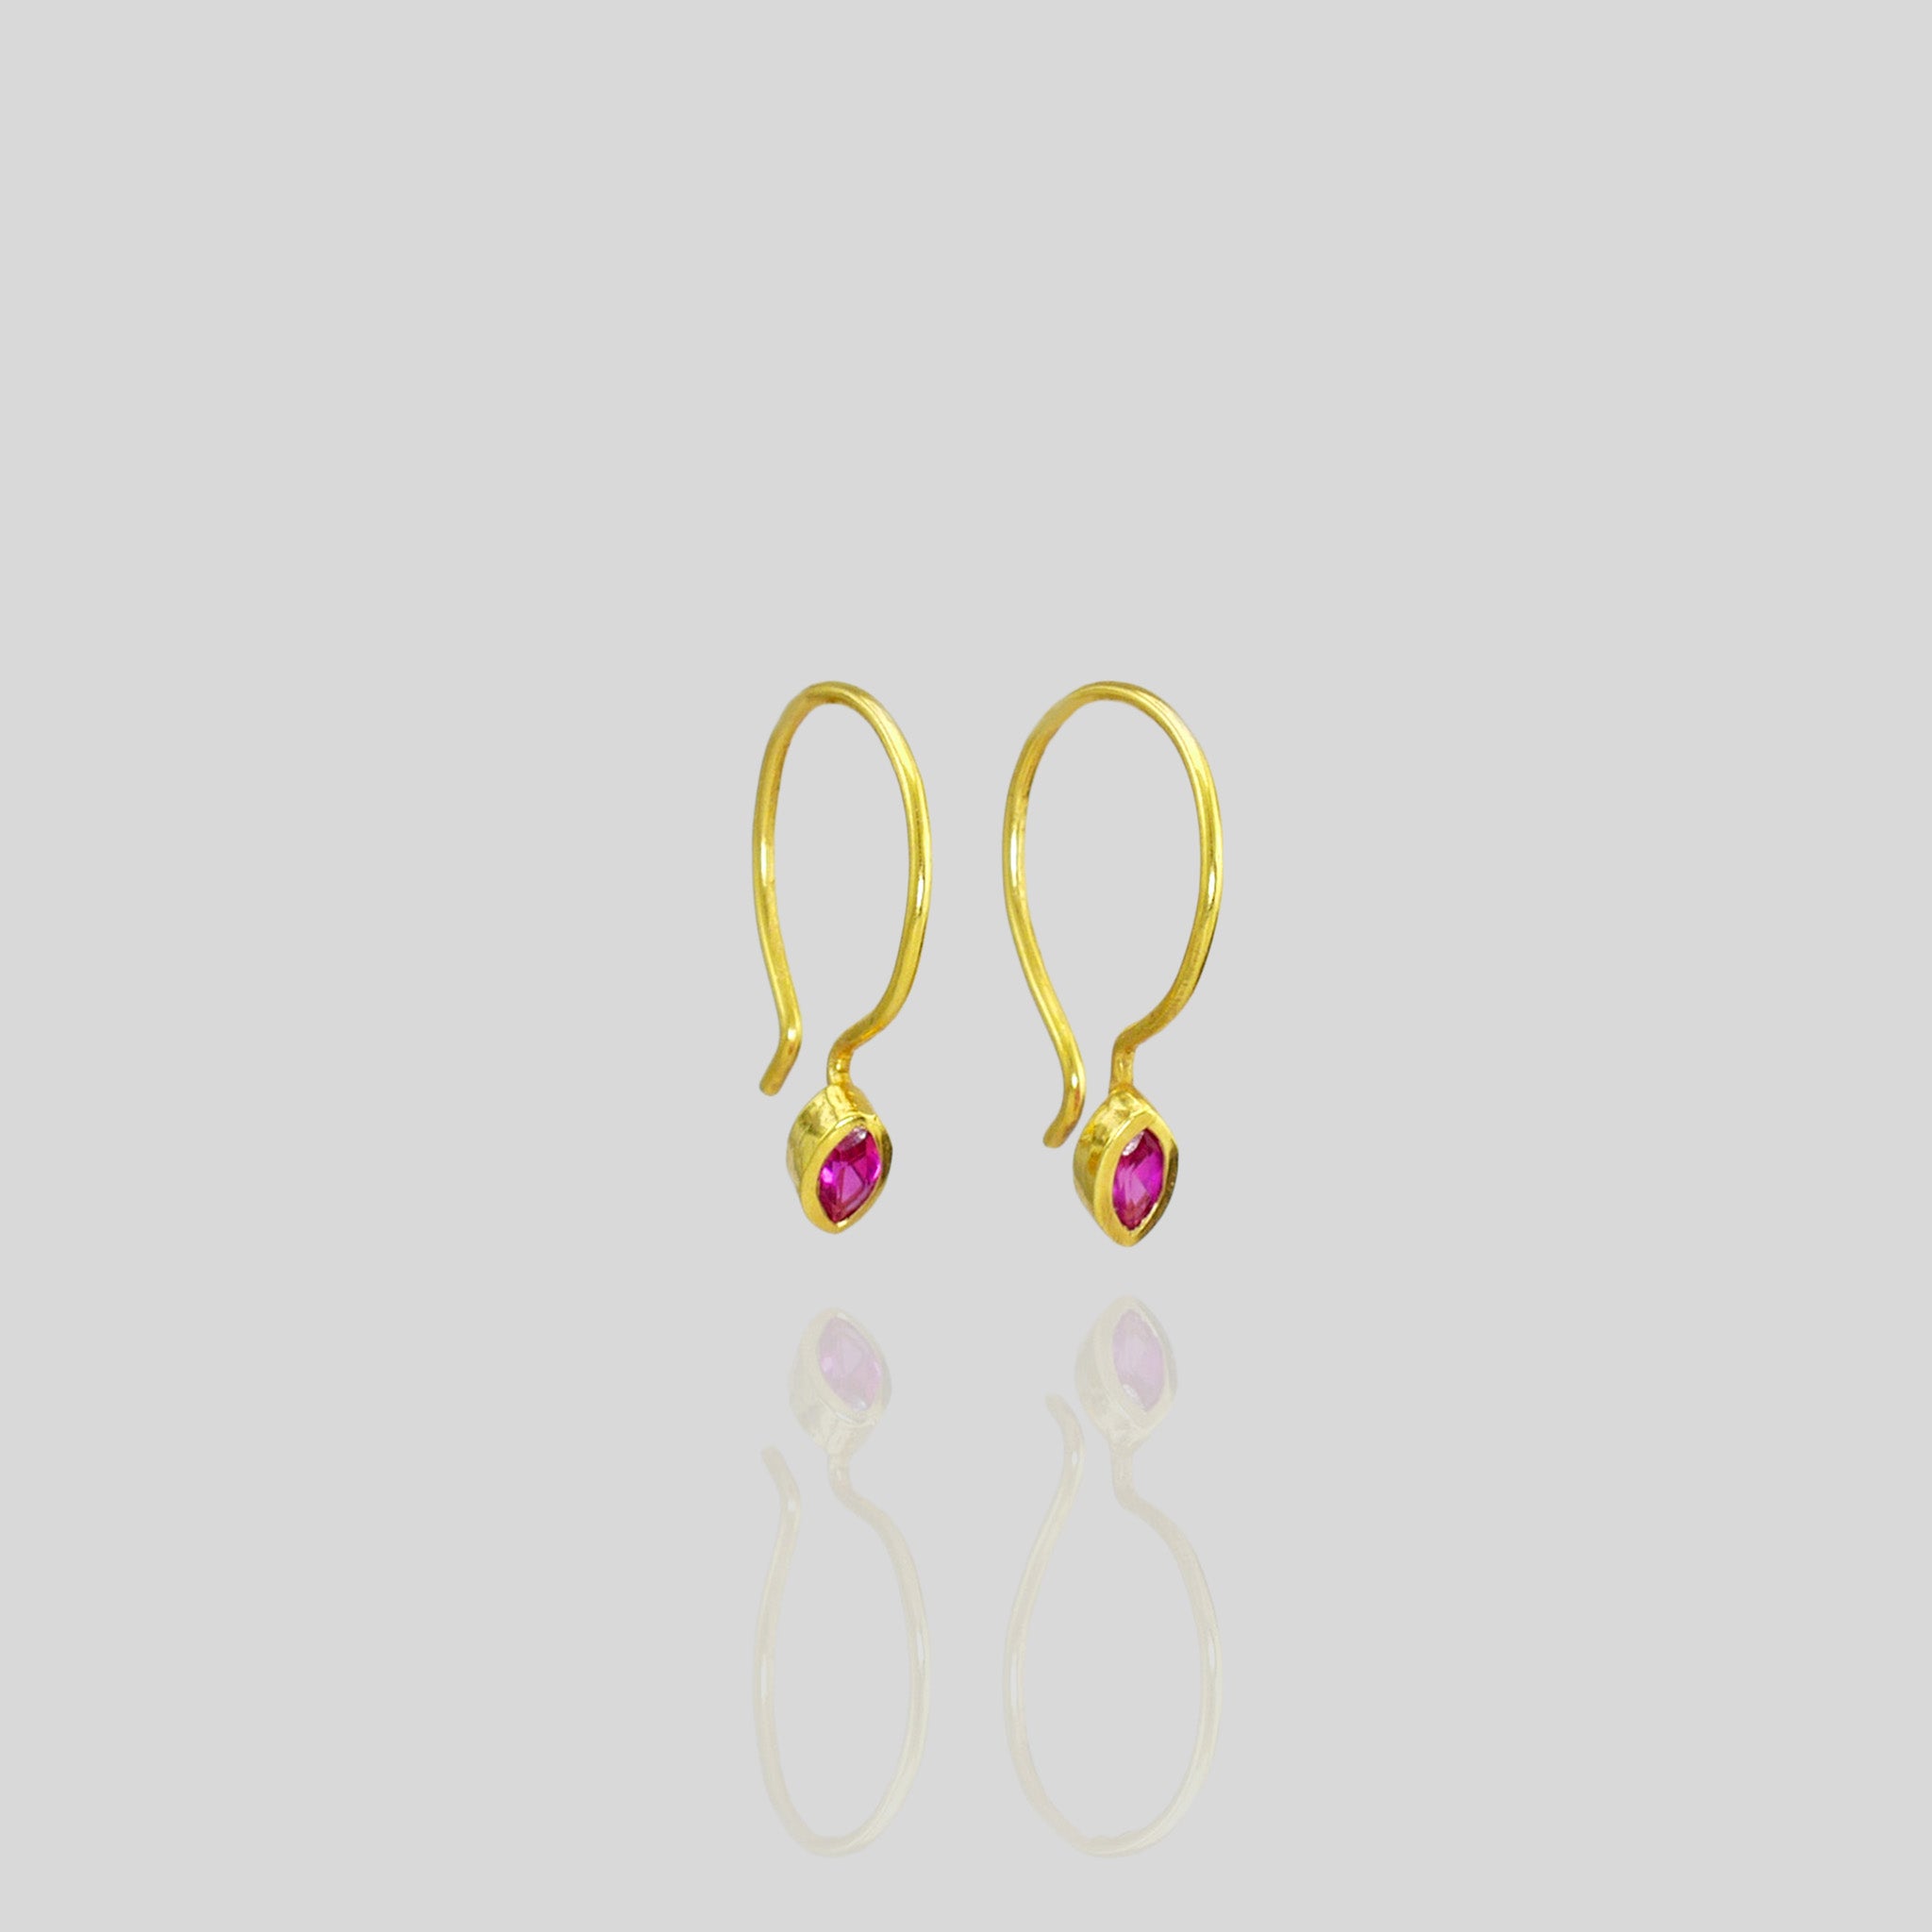 Close up of Tiny Ruby Marquee earrings on playful gold hoops. Elegant and eye-catching!